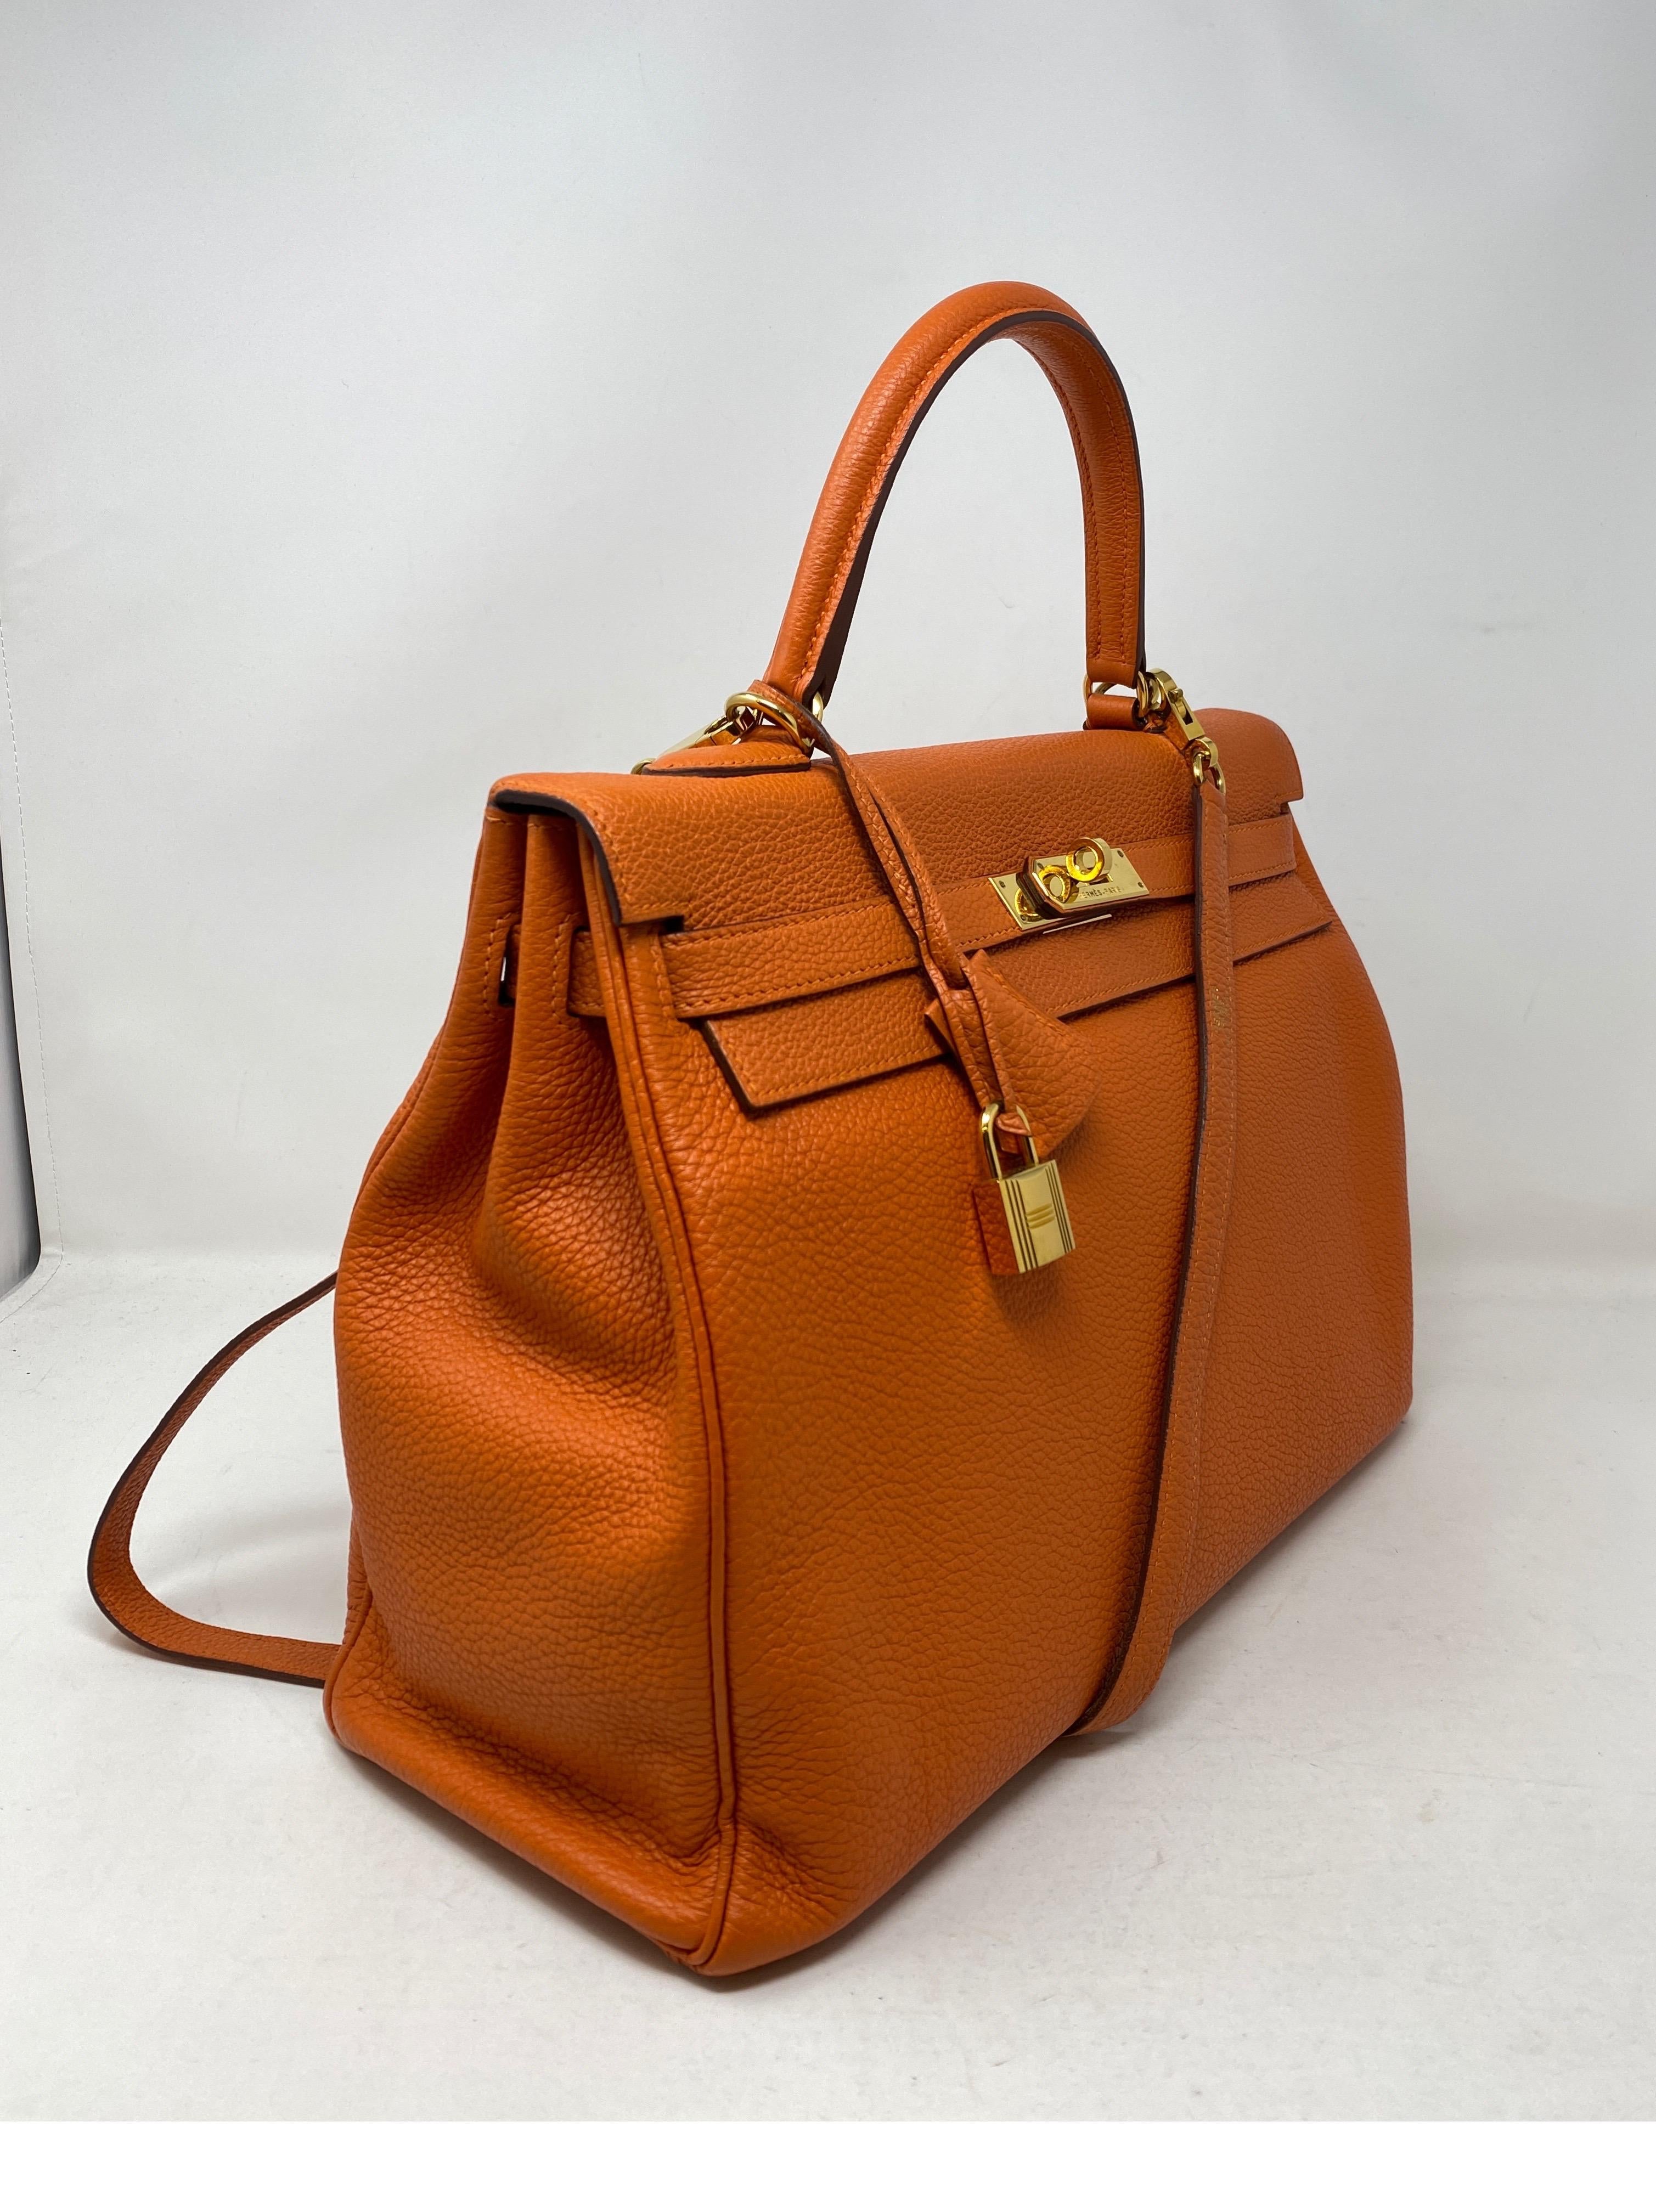 Hermes Orange Kelly 35 Bag. Gold hardware. Good condition. Kelly are desirable for their straps. Beautiful bag. Includes clochette, lock, keys, and dust cover. Guaranteed authentic. 